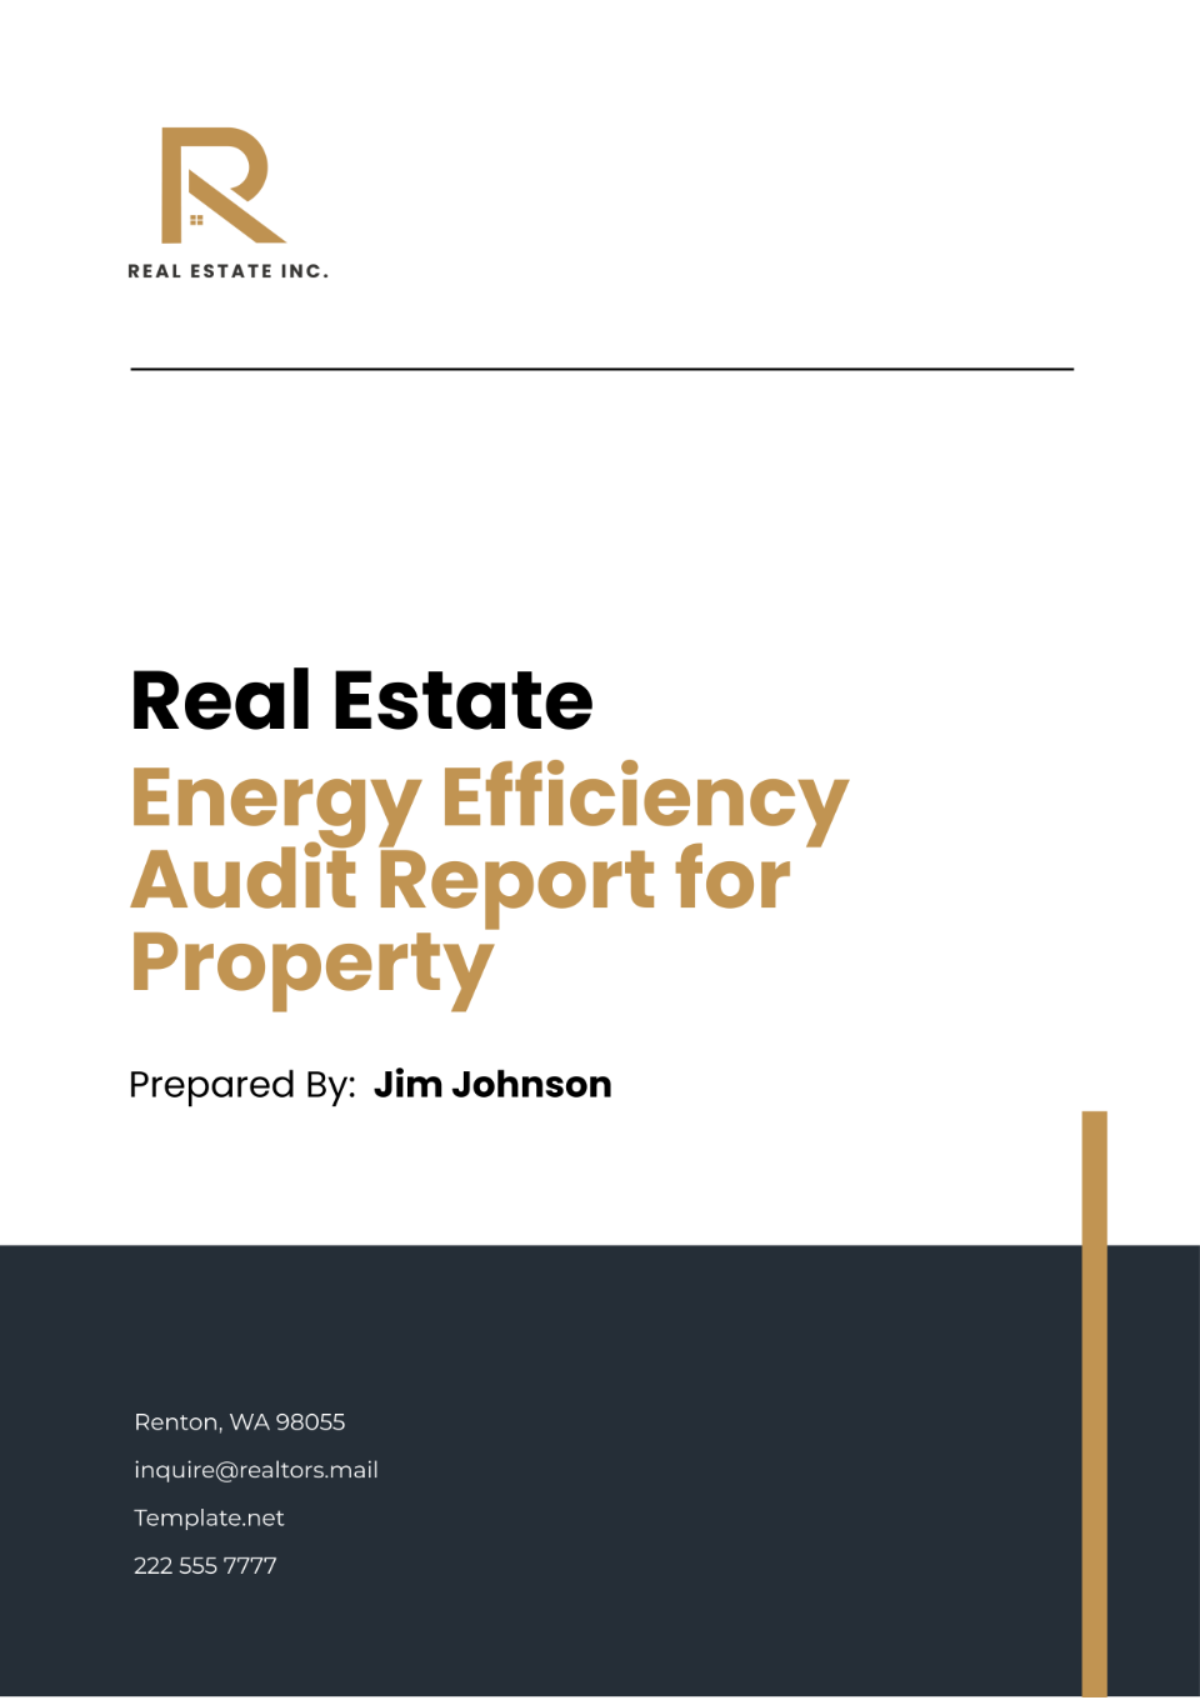 Free Real Estate Energy Efficiency Audit Report for Property Template